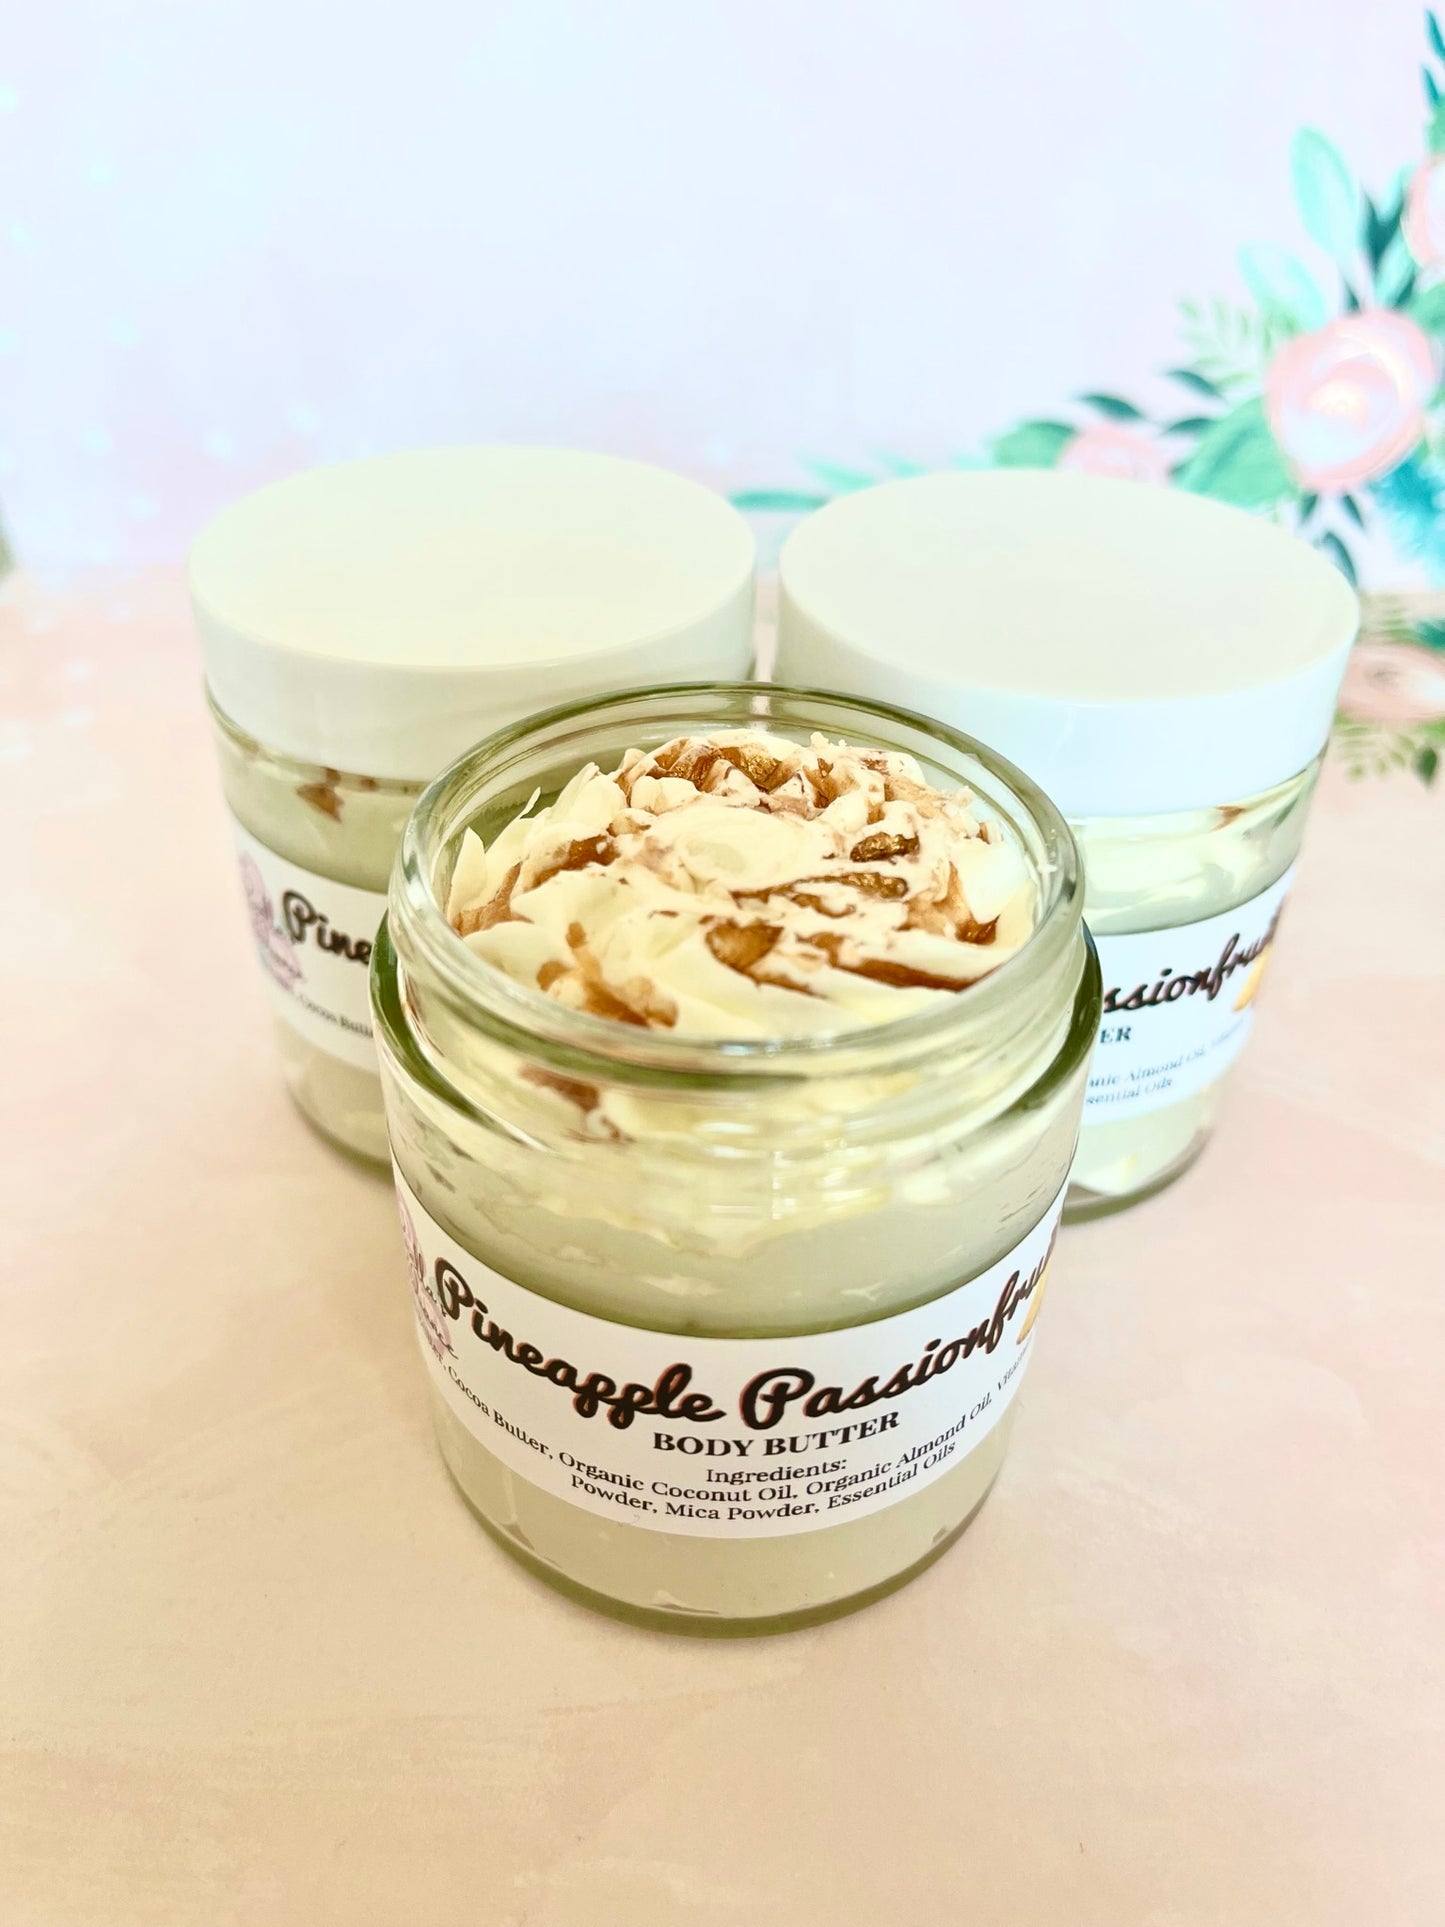 Pineapple Passionfruit Body Butter